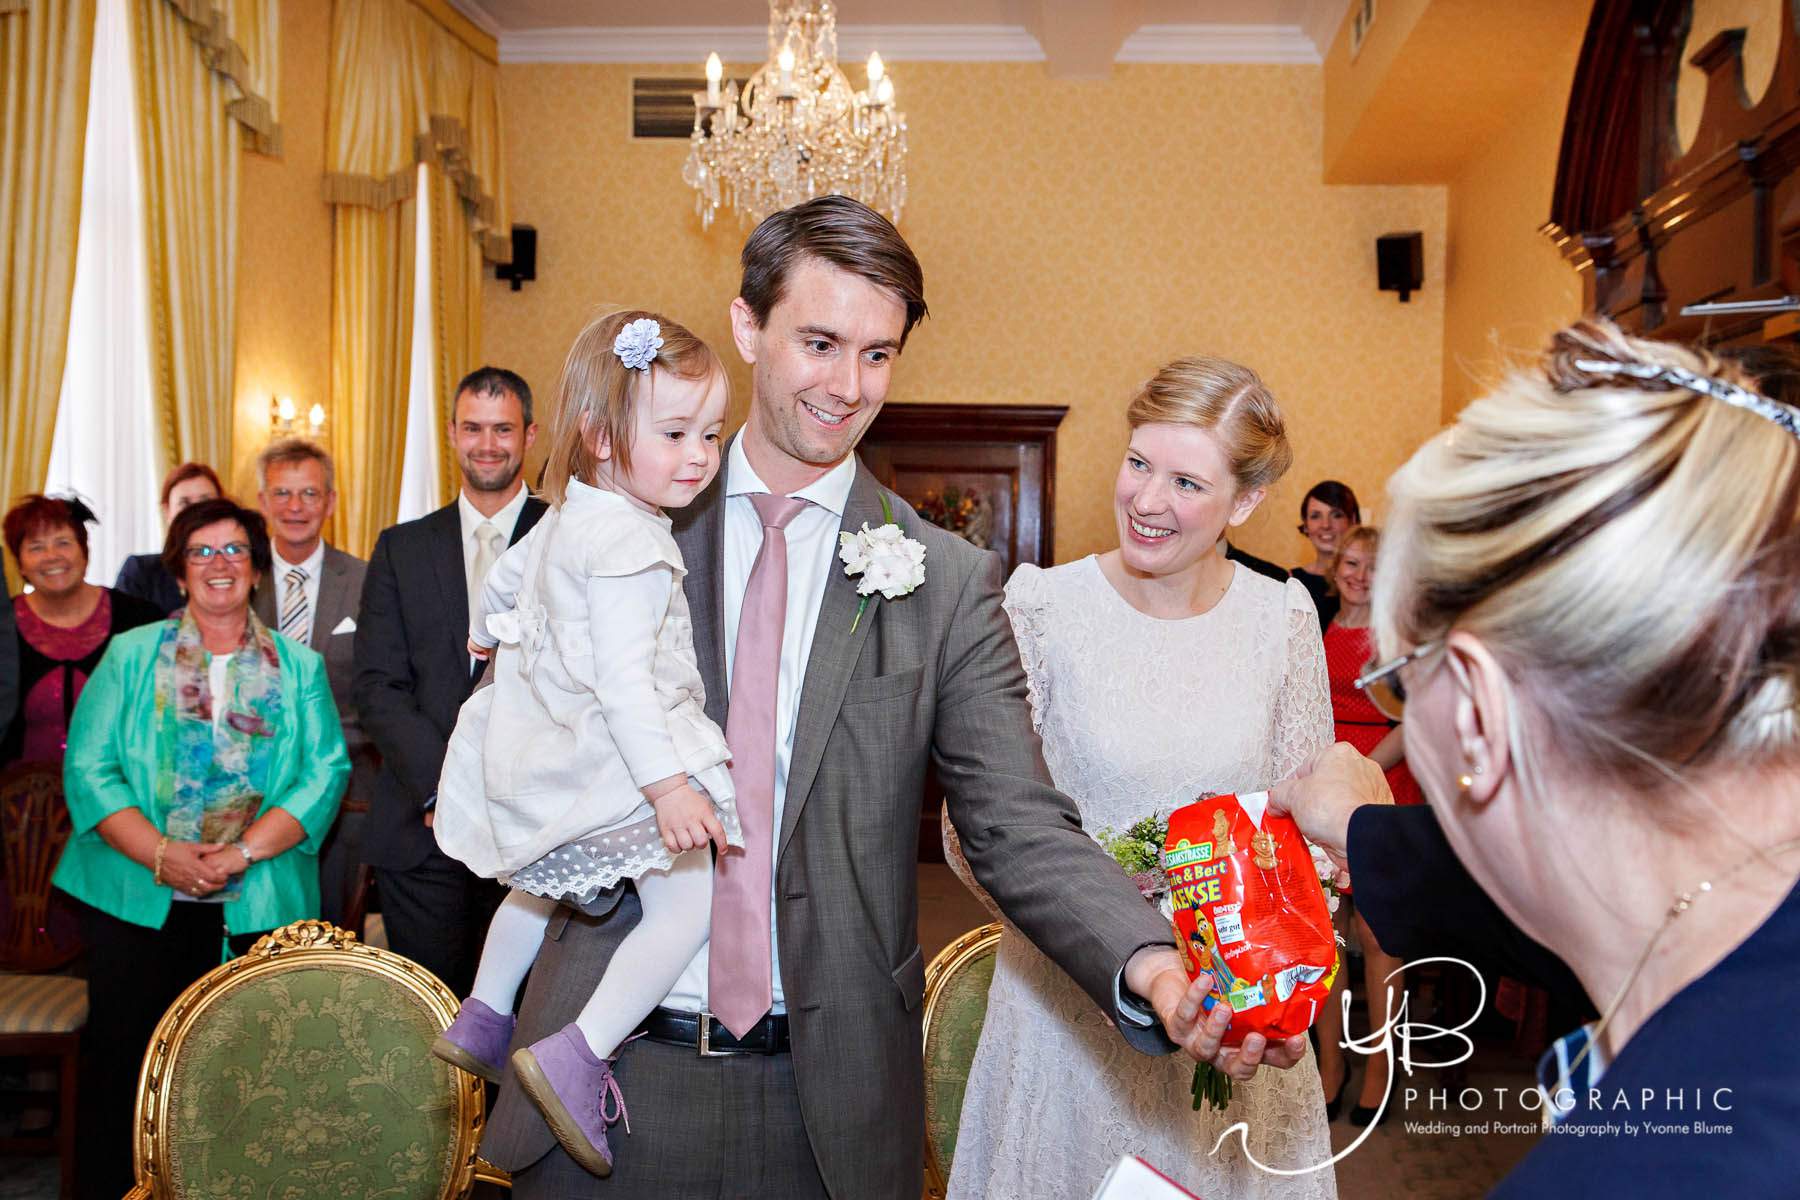 Brydon Room Wedding at Chelsea Register Office photographed by YBPHOTOGRAPHIC